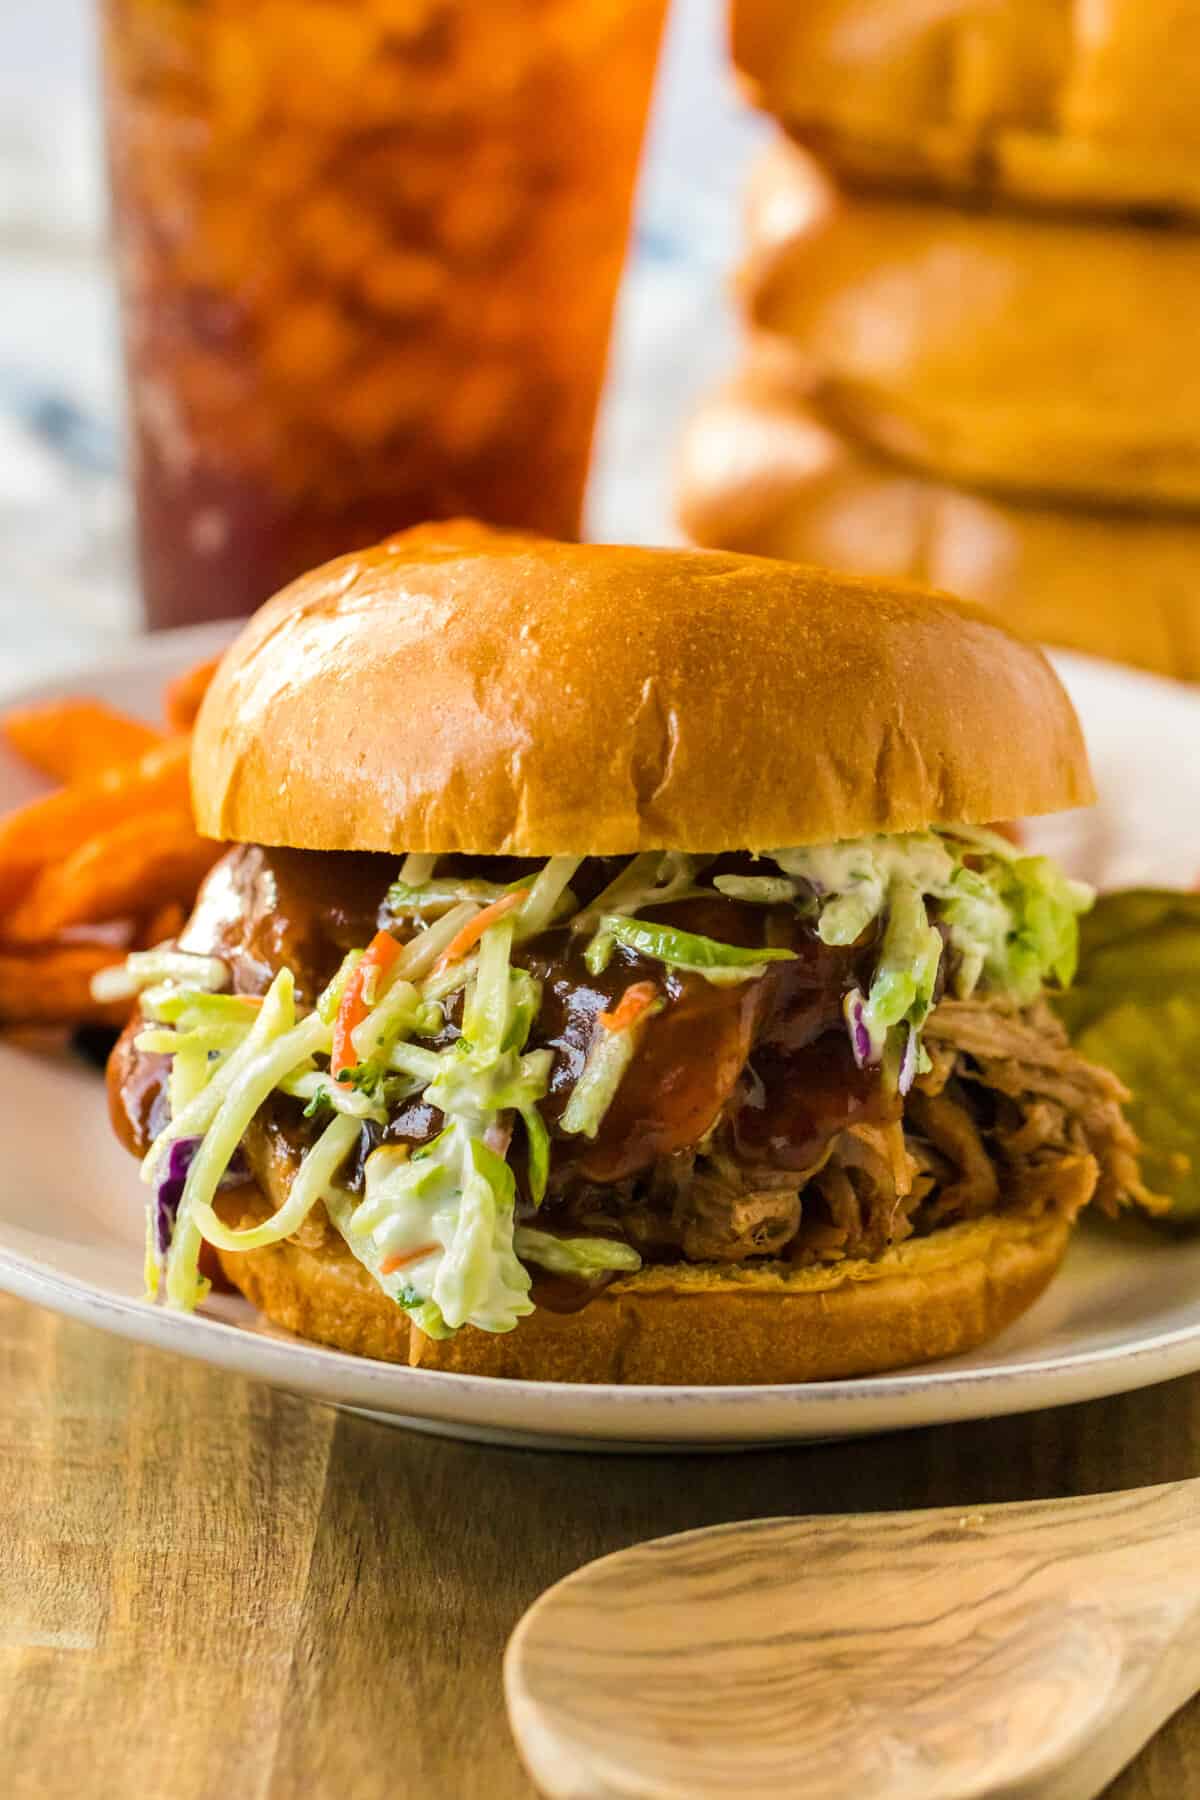 Root beer pulled pork sandwich topped with coleslaw and served with glass of iced tea and sweet potato fries.